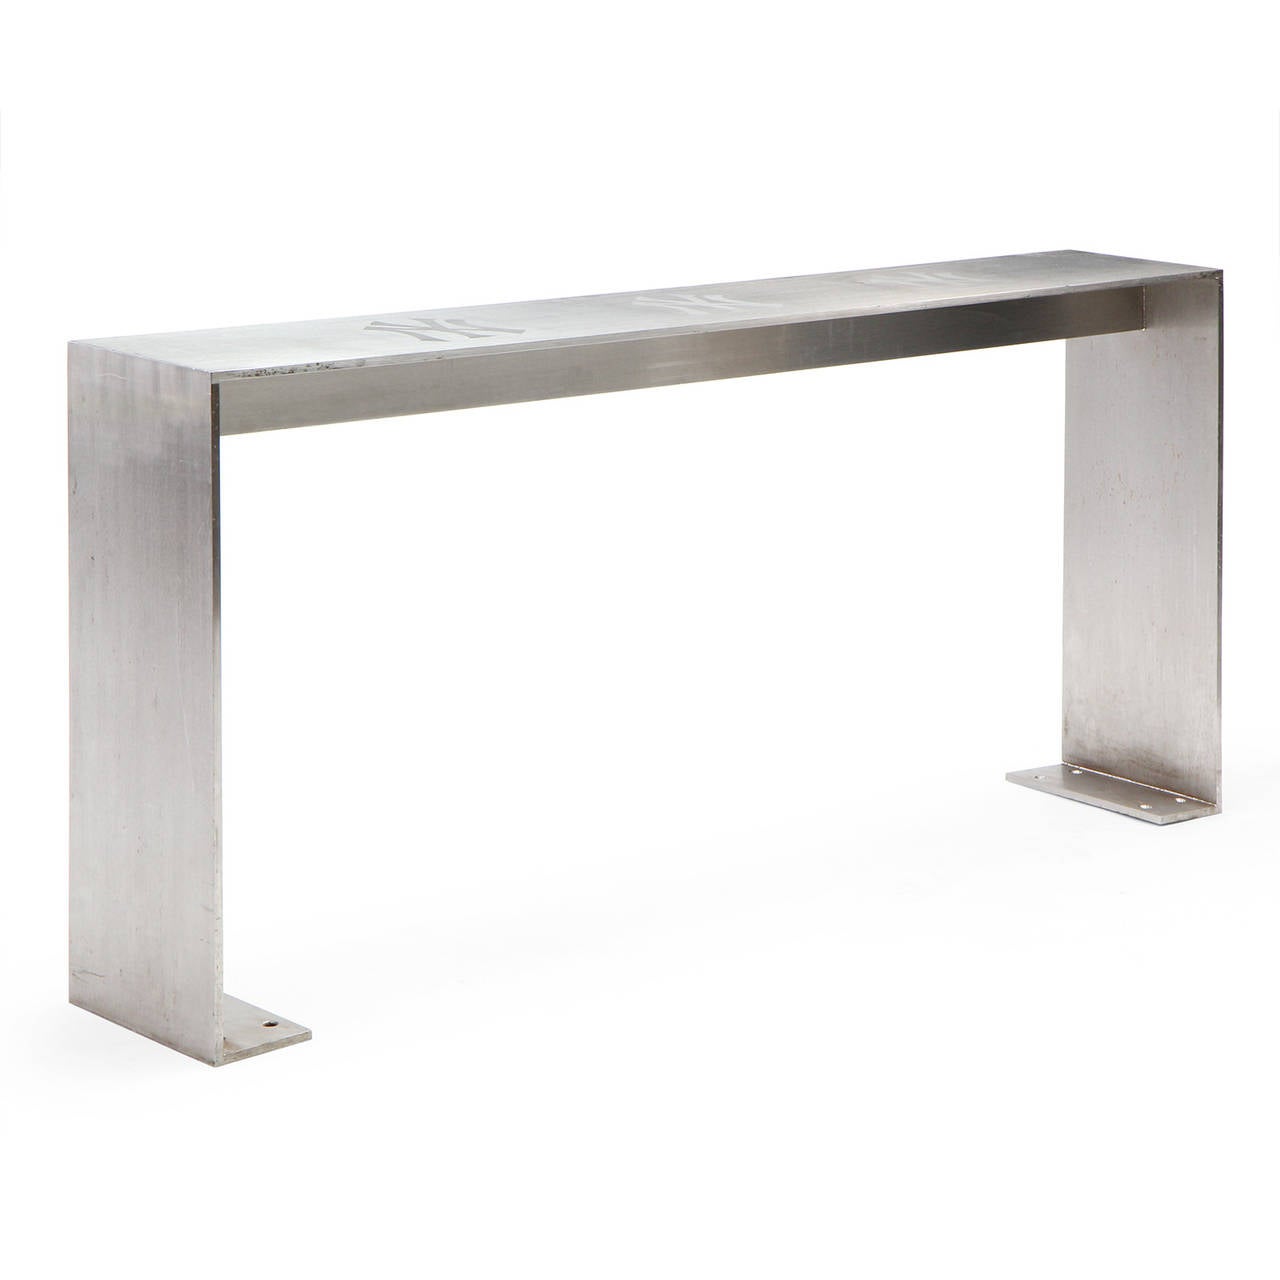 Low Minimalist Steel Table from Yankee Stadium In Good Condition For Sale In Sagaponack, NY